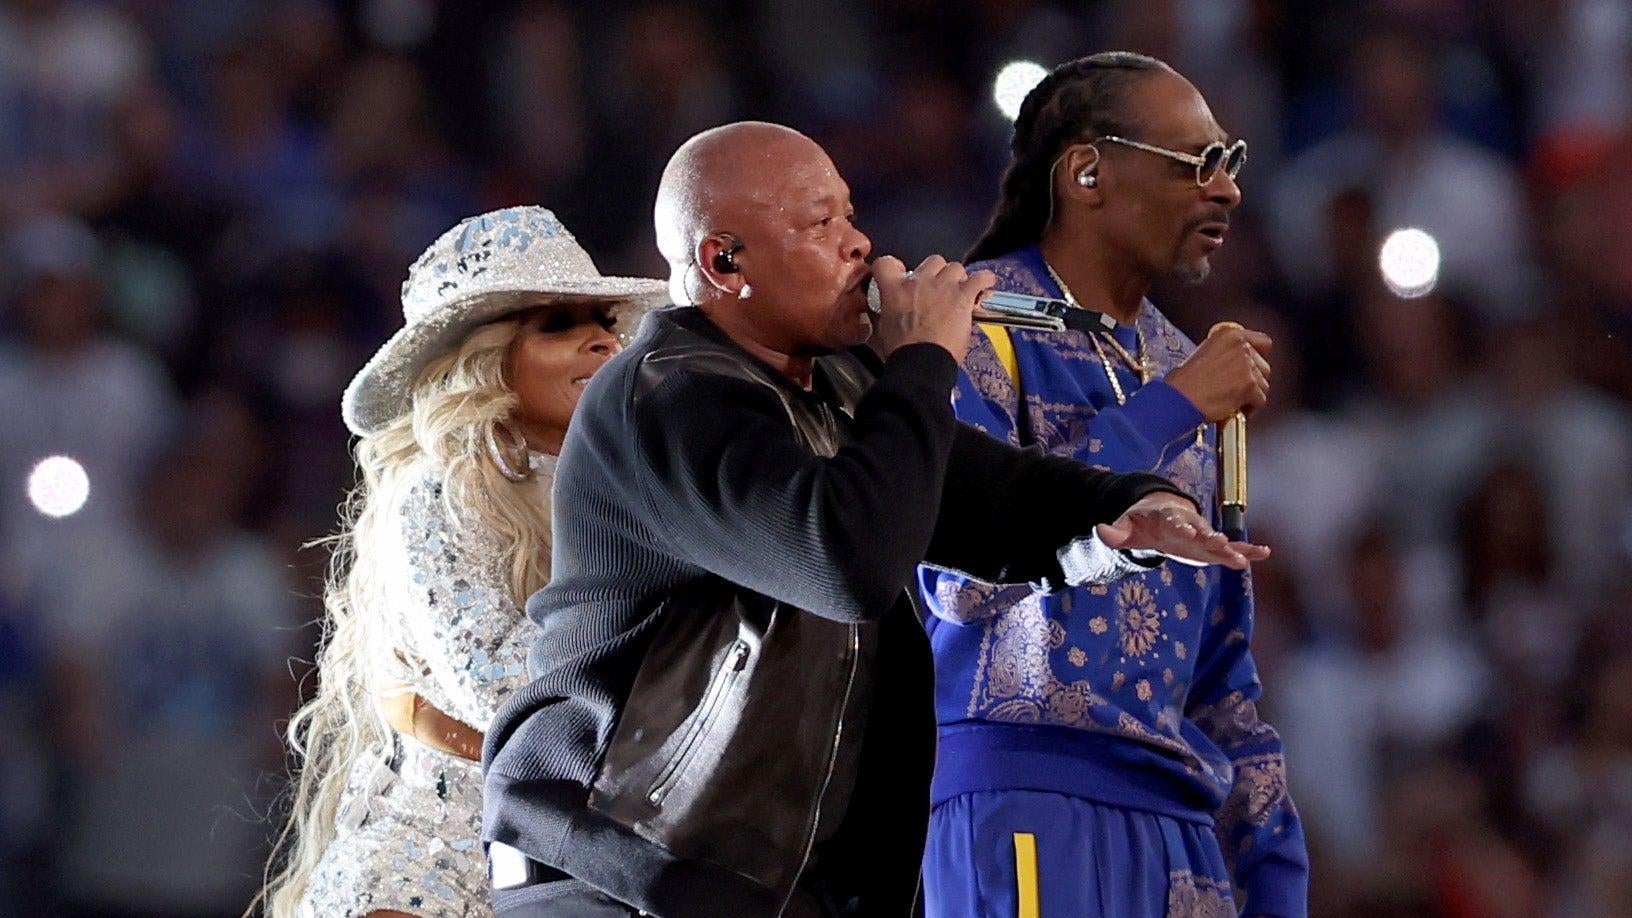 The NFL doesn't want folks embedding their video, so here is Dr. Dre performing alongside Mary J. Blige and Snoop Dogg . (Photo: Rob Carr, Getty Images)